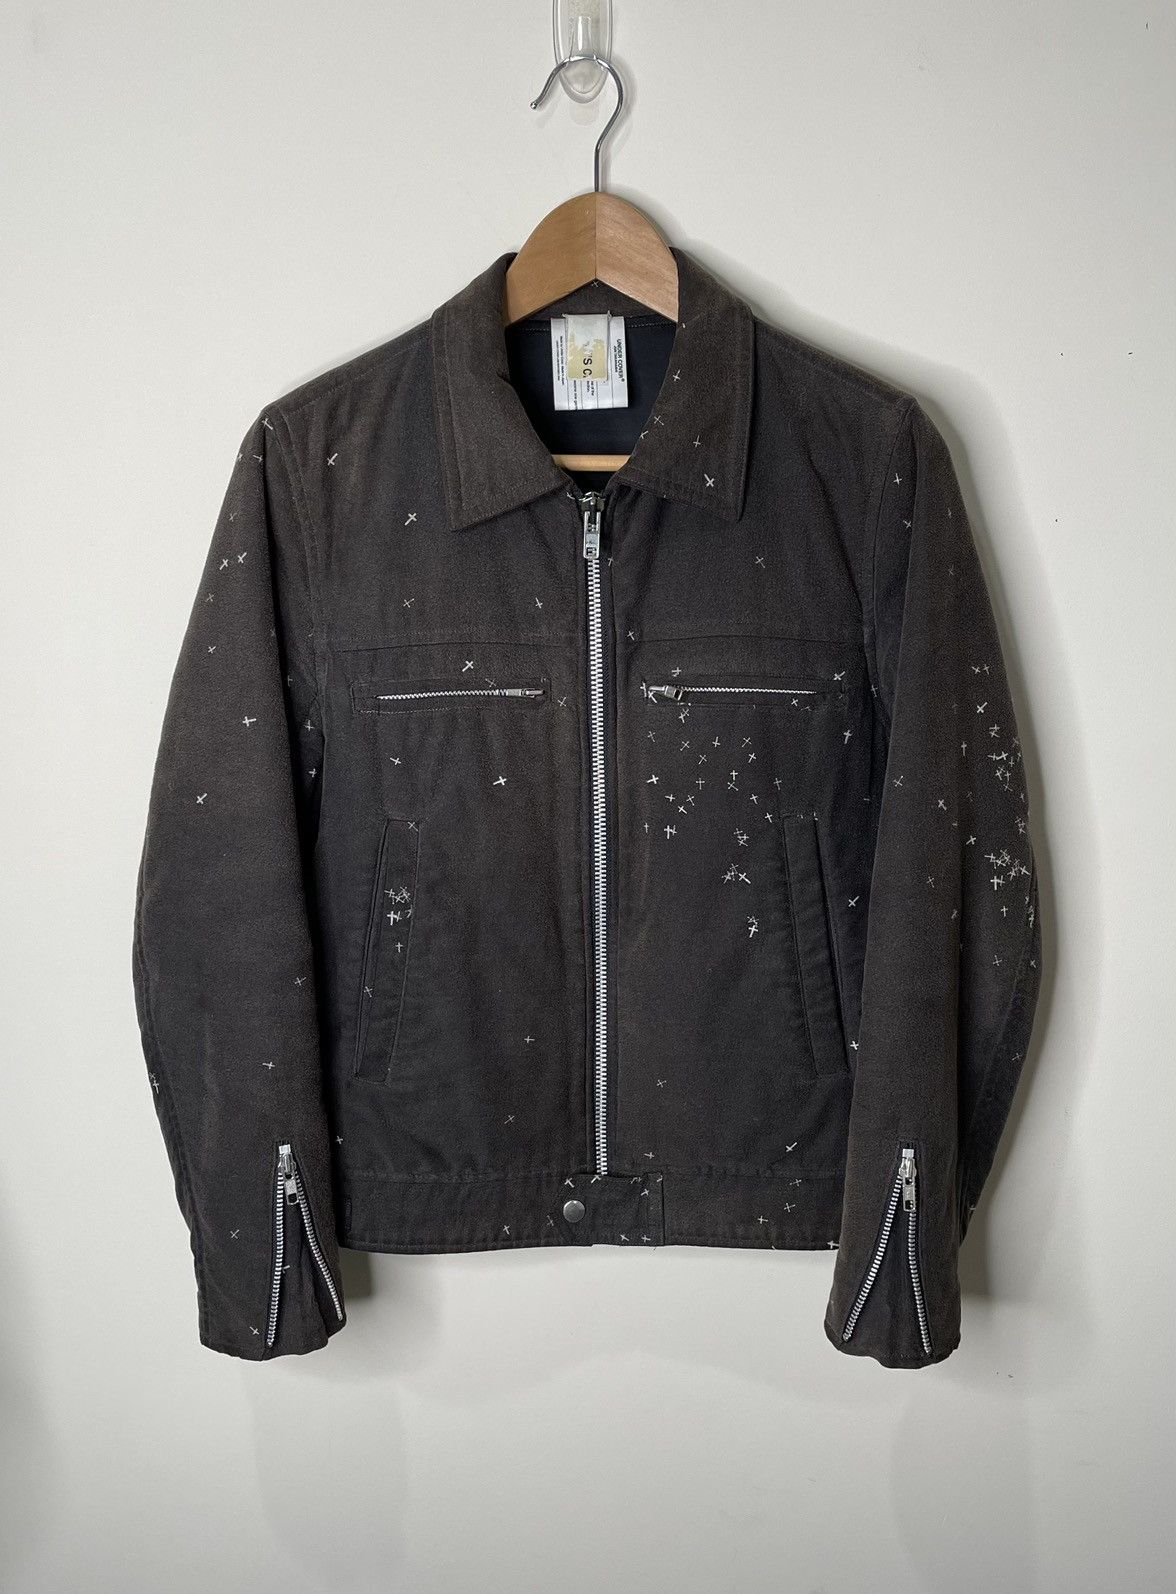 Undercover Undercover AW02/03 Witch's Cell Division Cross Jacket 